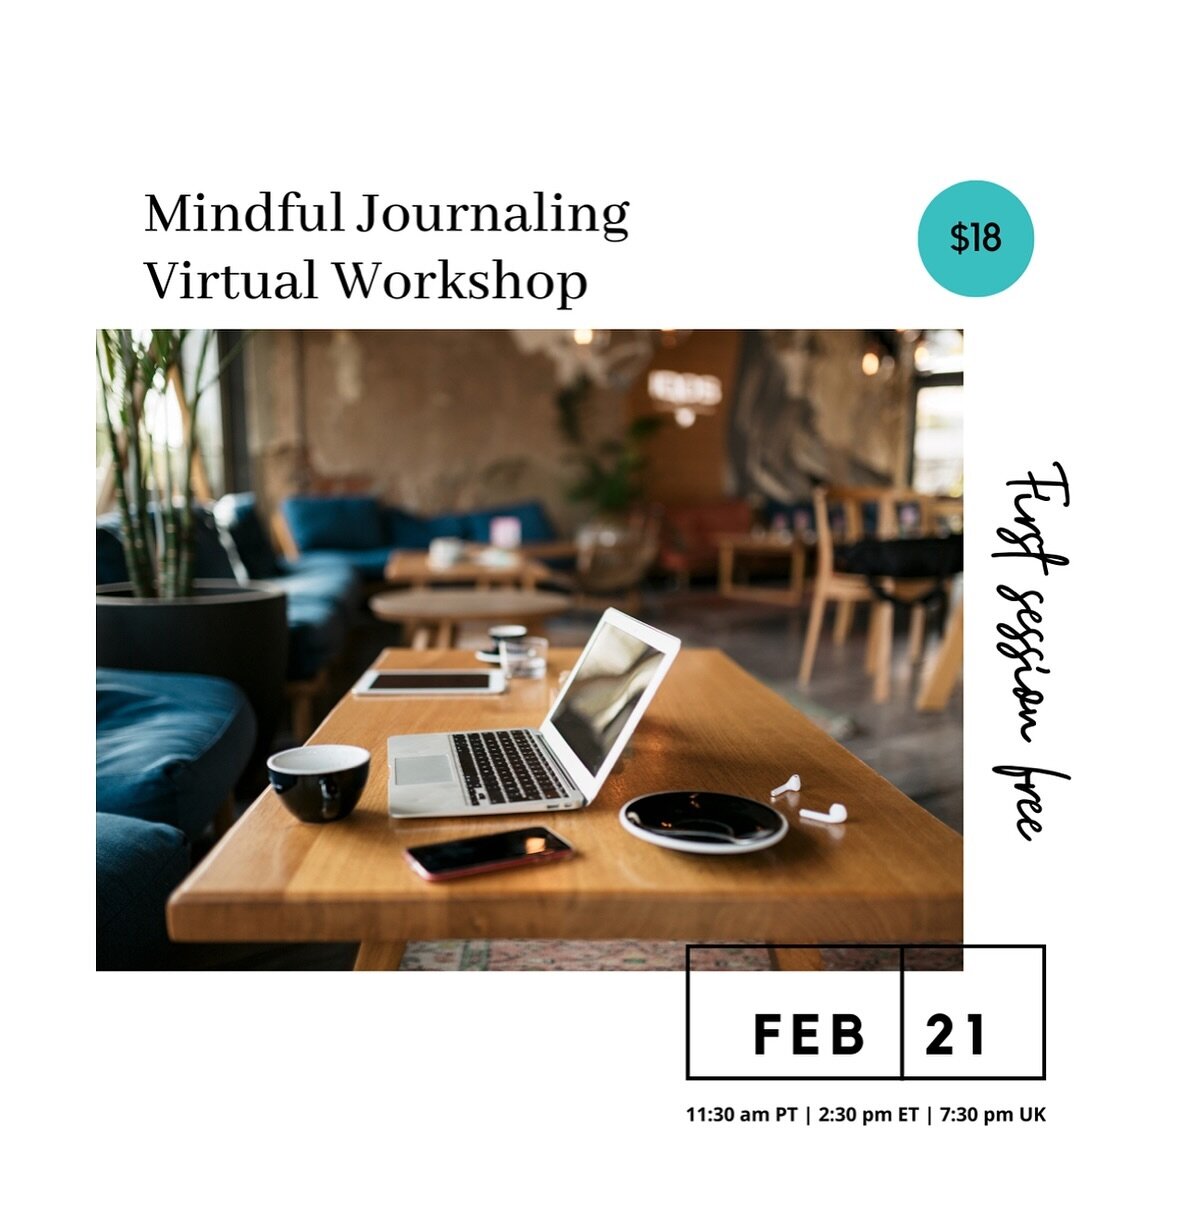 Take a break and join us for a mindful journaling workshop. An invitation to pause, check in with yourself and reflect. 
No experience needed. Come as you are, experienced journalers and newcomers are welcome. 

DM for a free taster session.
Online t